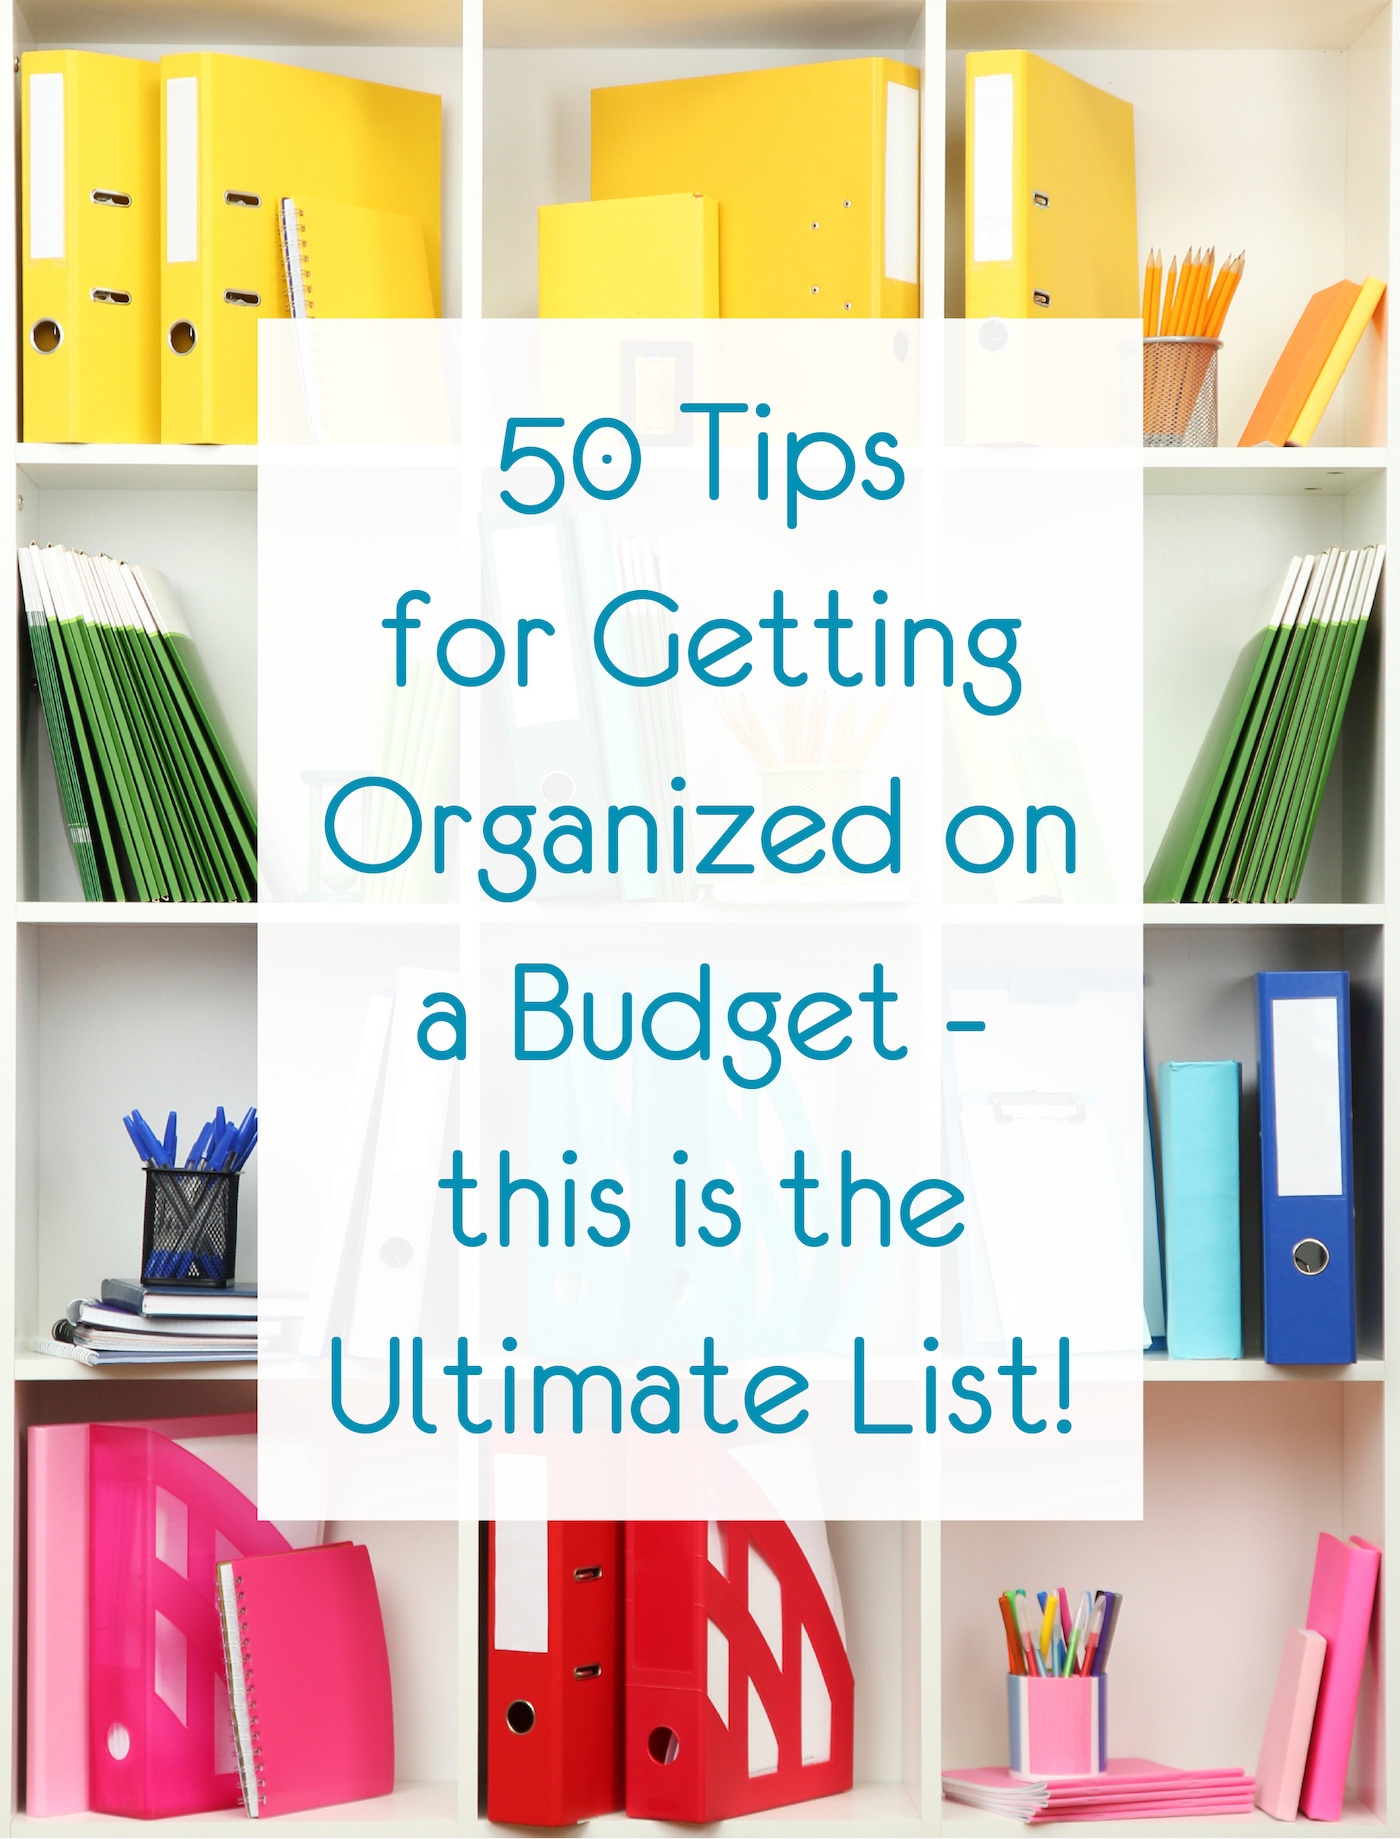 50 Tips for Getting Organized on a Budget